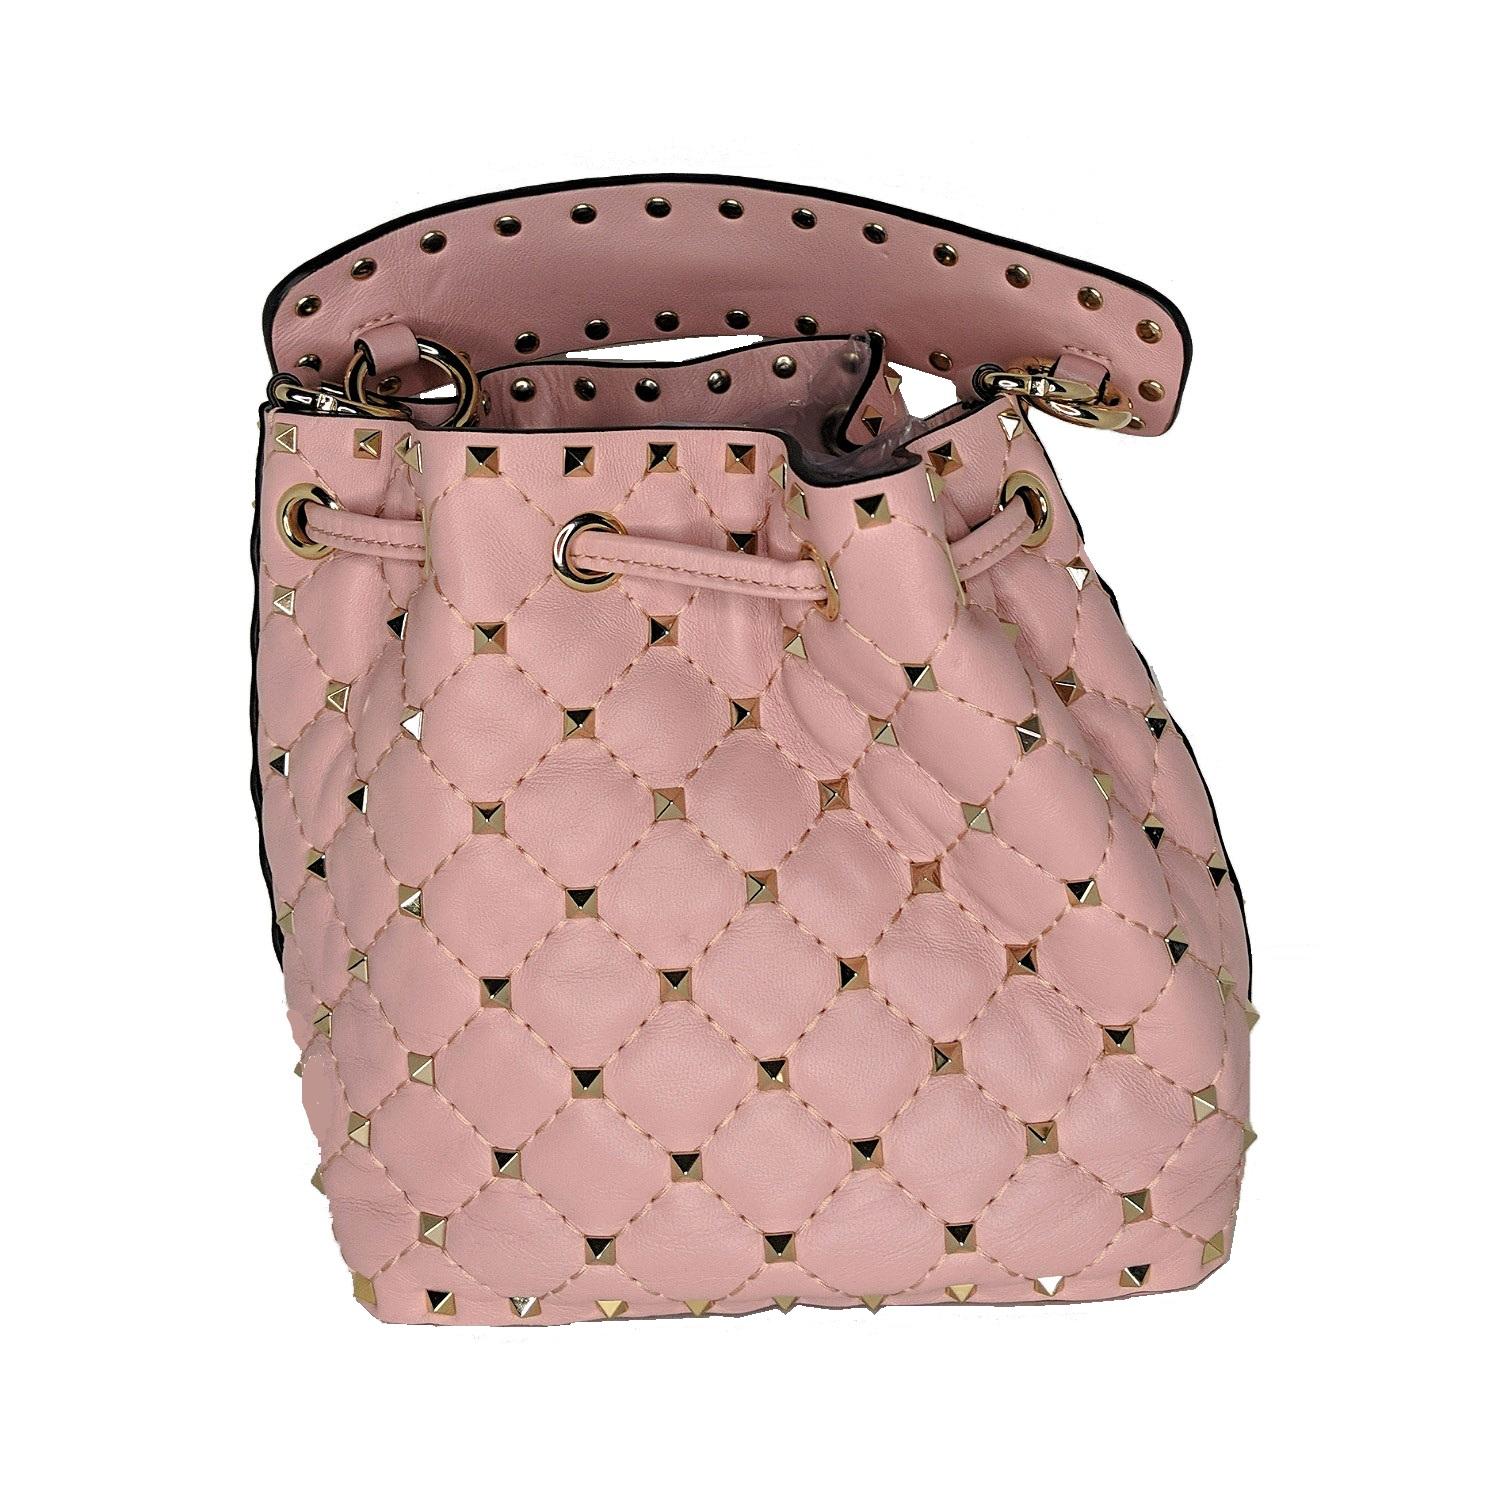 Valentino Rockstud Quilted Bucket Bag In Pink. Valentino bucket bag crafted in quilted leather with gold-tone studded hardware and fittings. This bucket bag features 1 main compartment, 2 credit card slots, shoulder strap and drawstring closure.